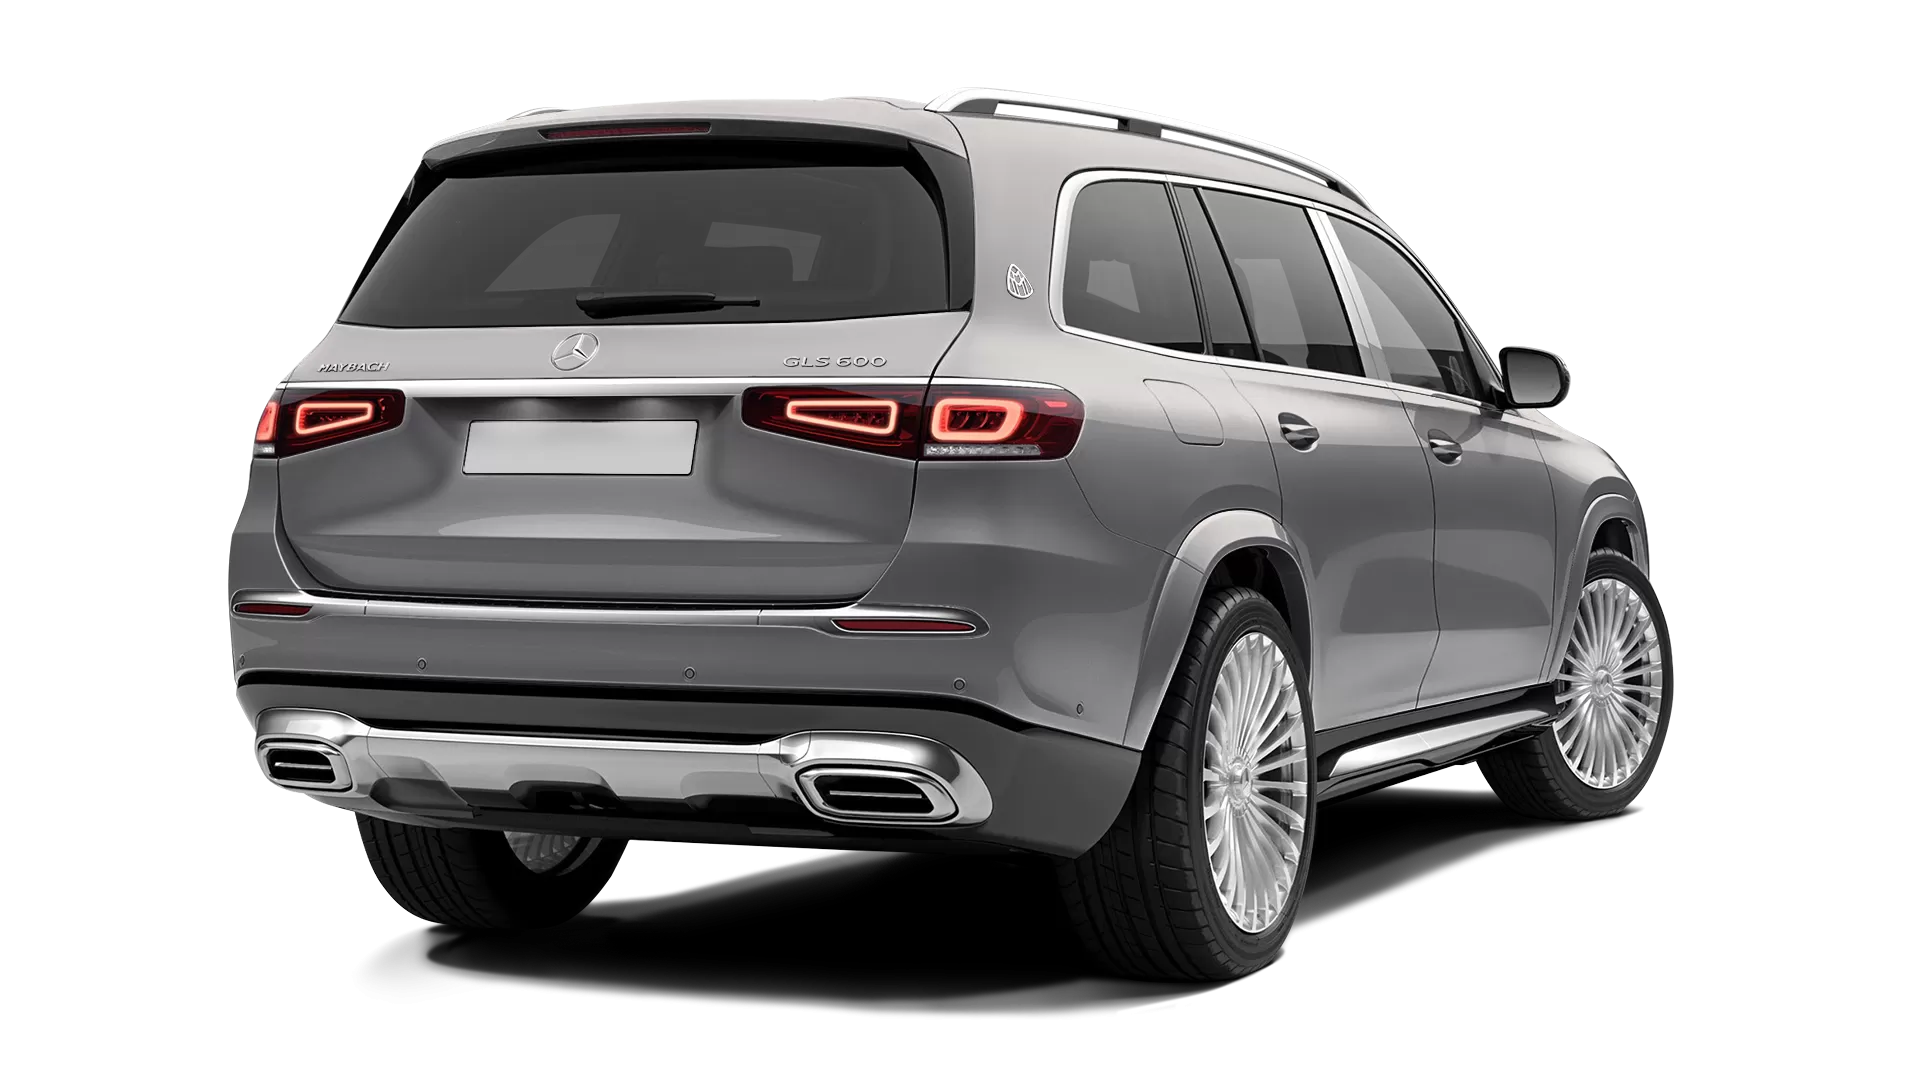 Mercedes Maybach GLS 600 stock rear view in Mojave Silver color